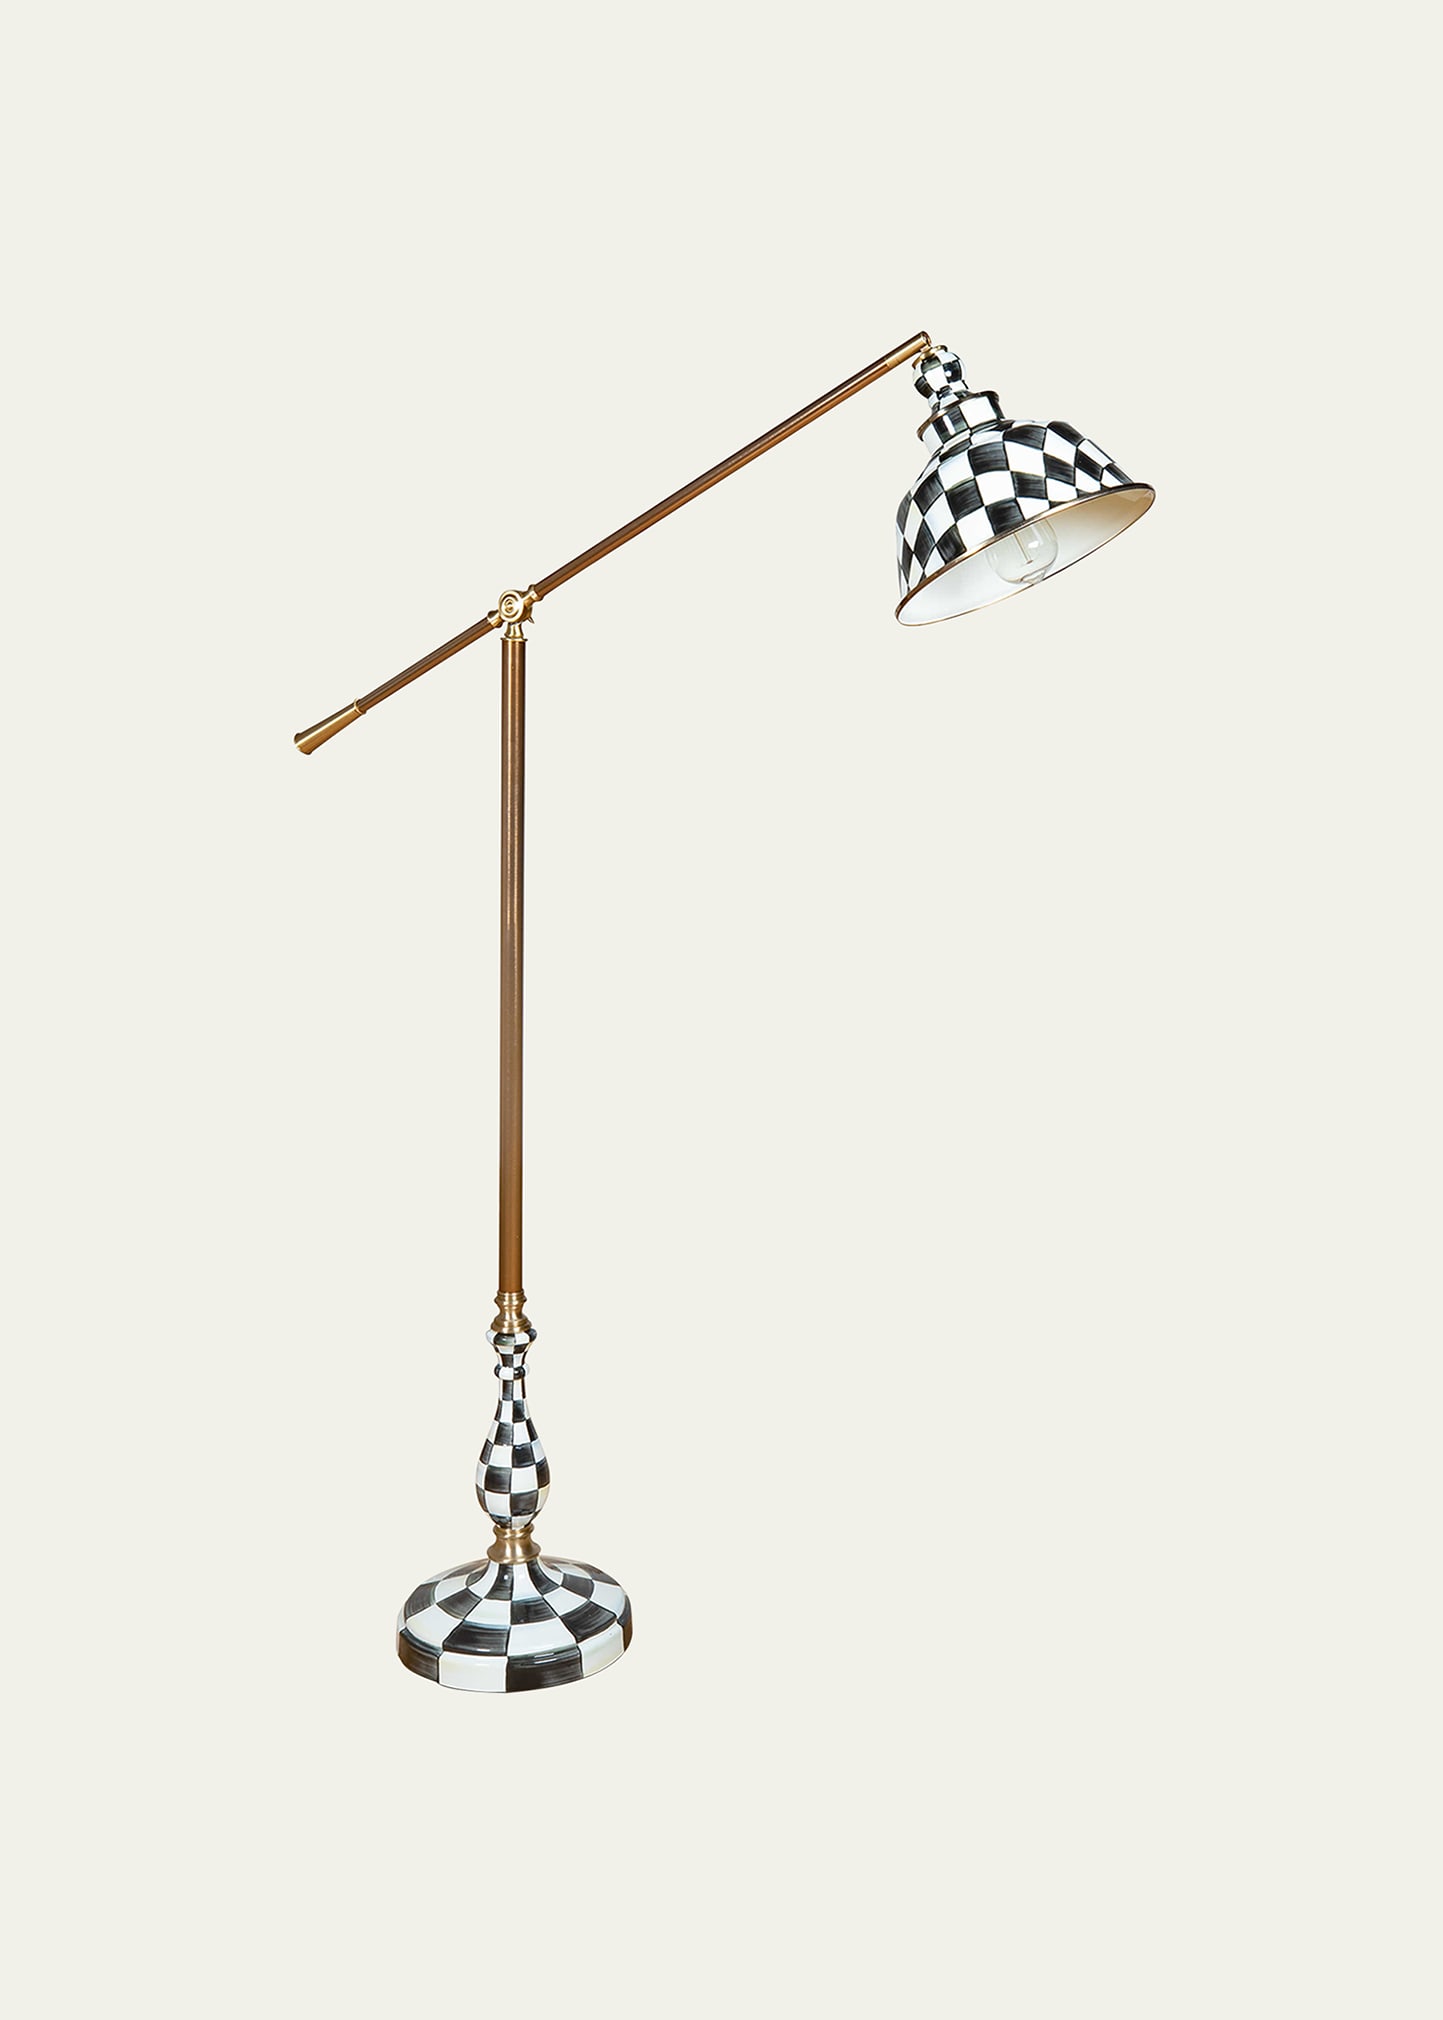 Mackenzie-childs Courtly Check Reading Floor Lamp